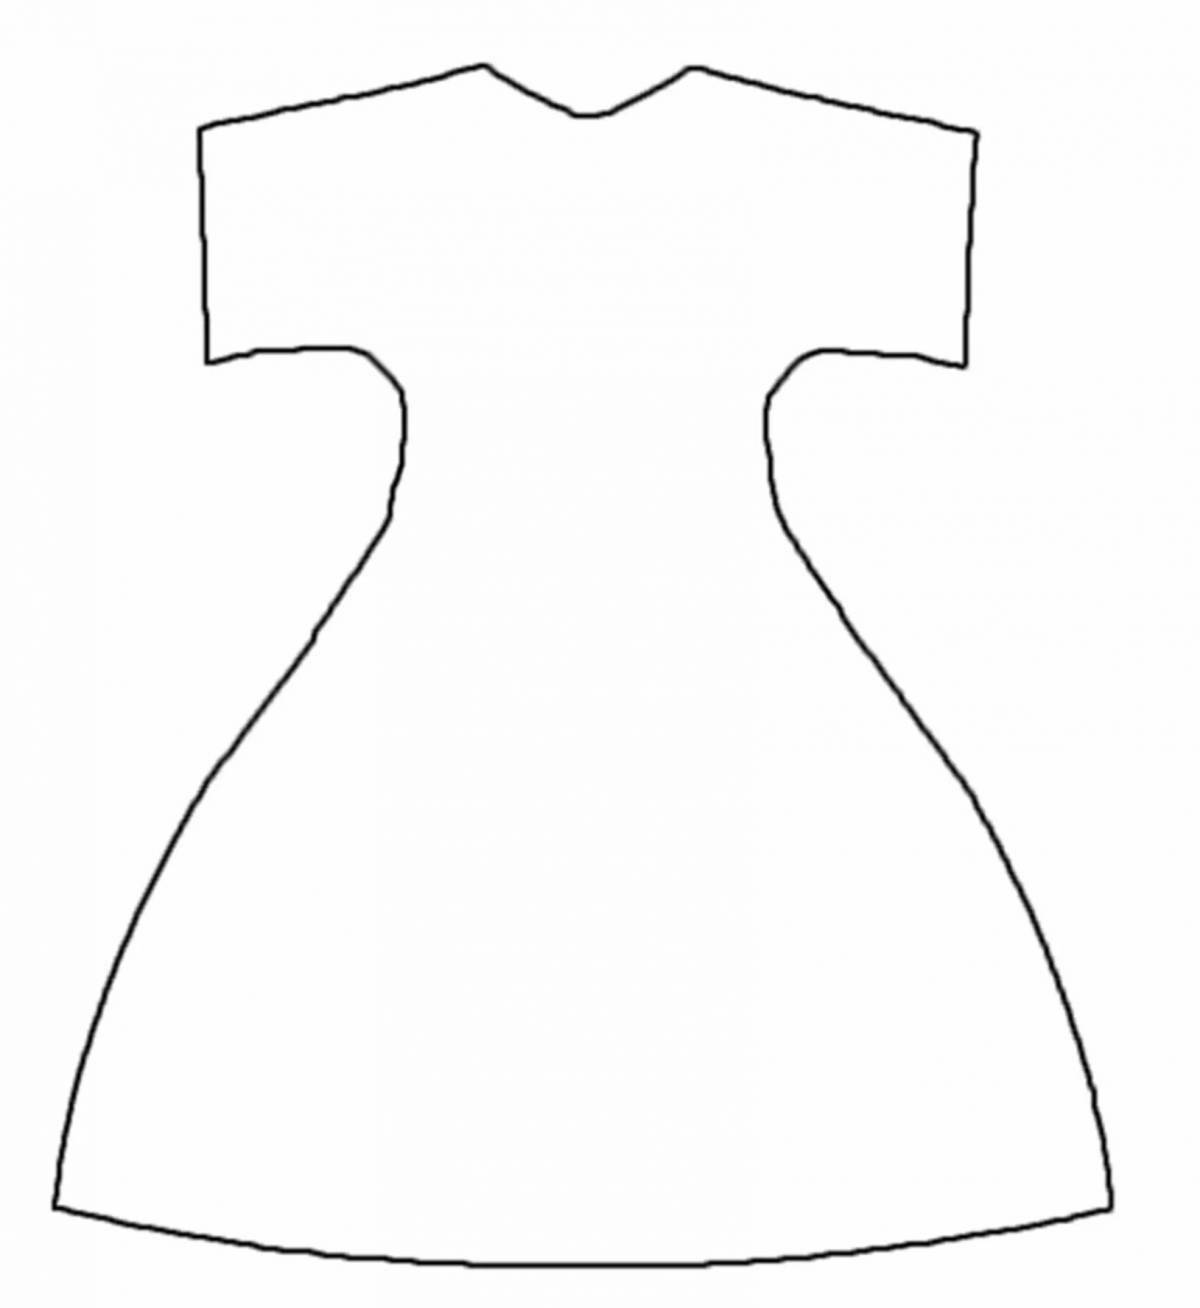 Coloring page charming dress for dolls